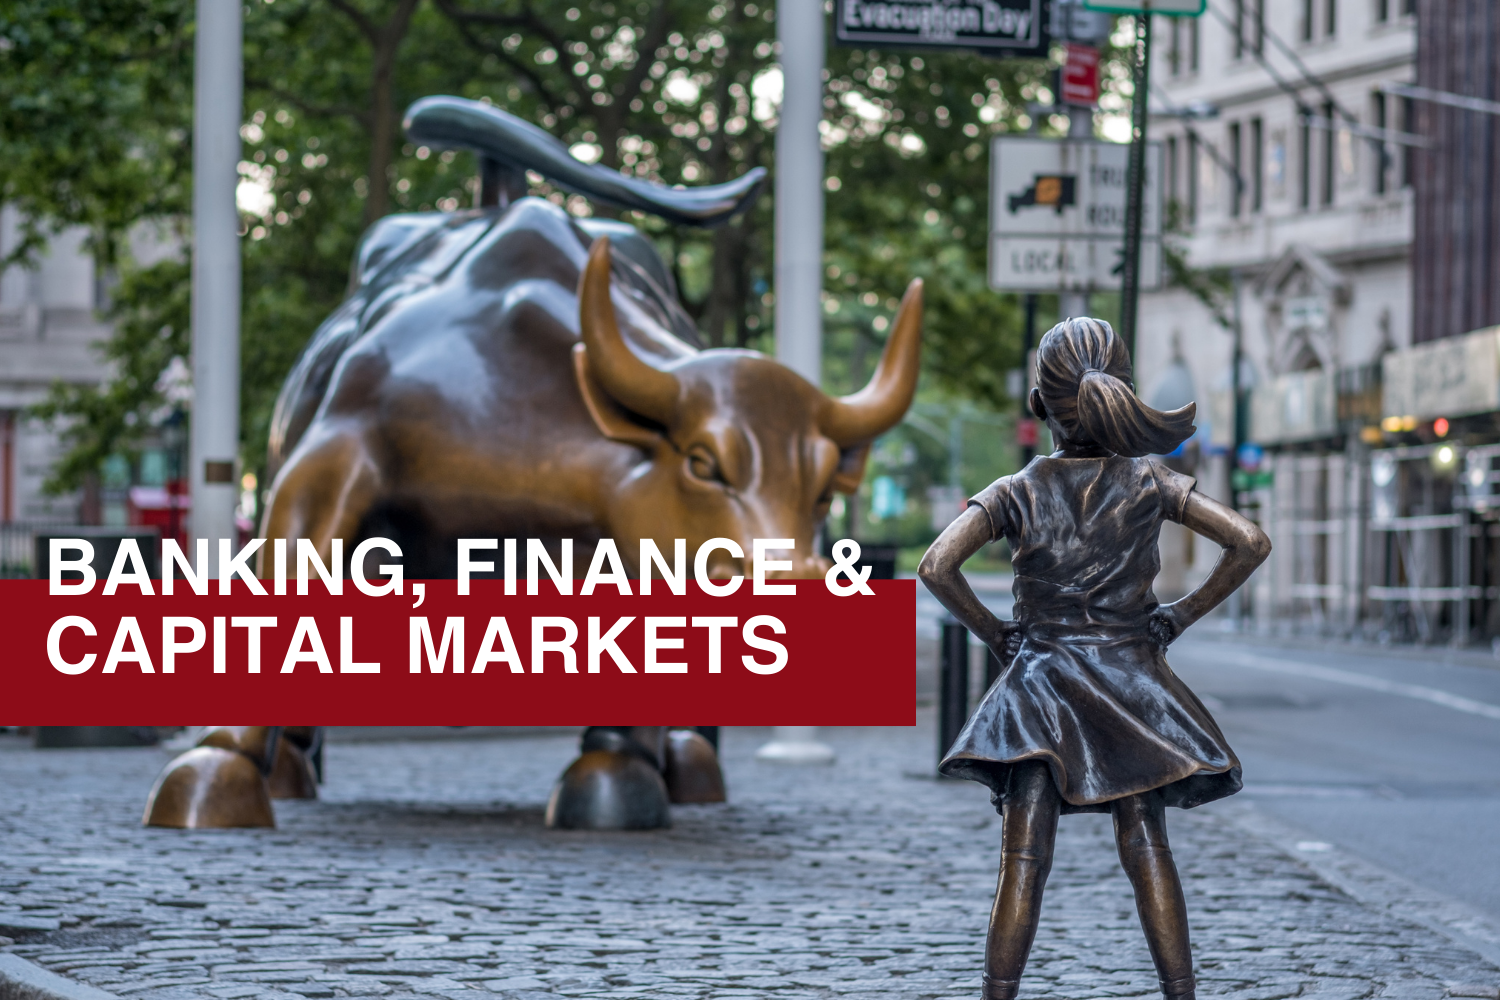 Banking, Finance & Capital Markets: An Introduction